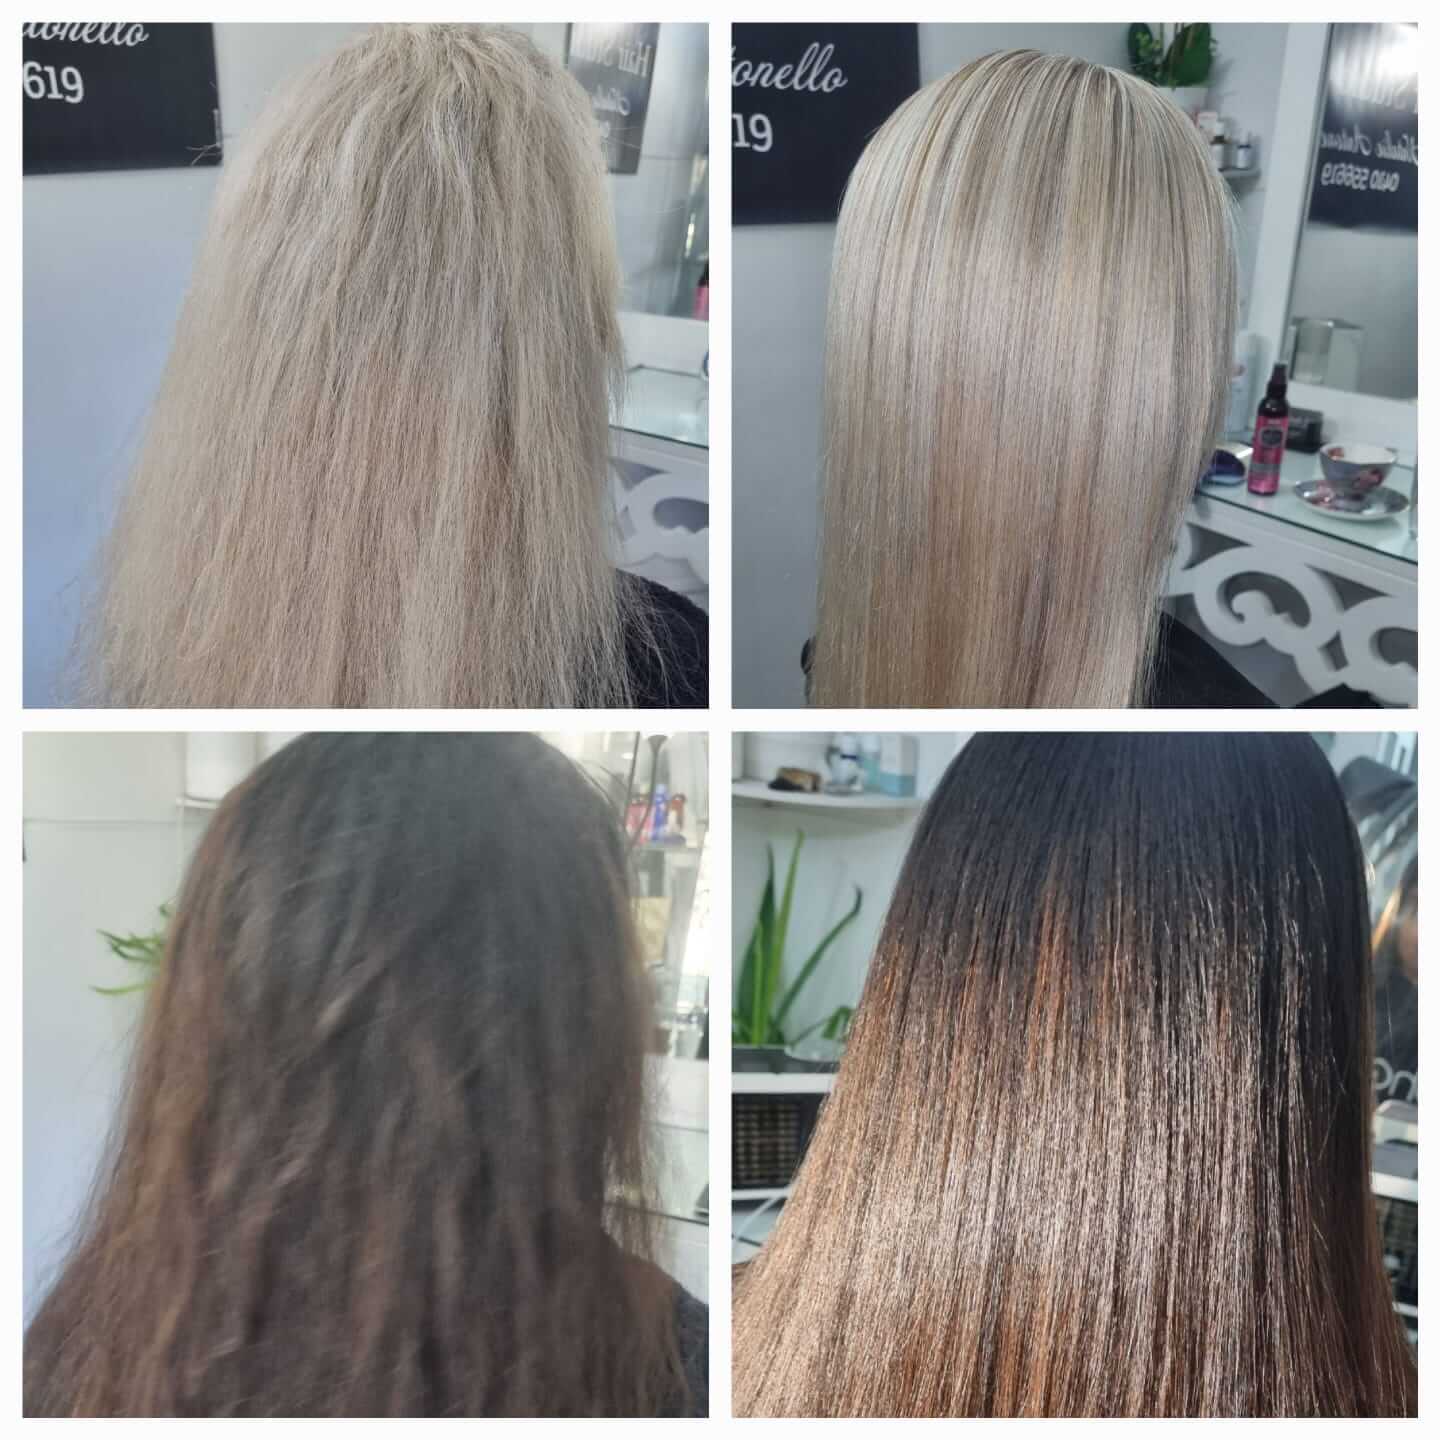 hair before treatment and after treatment